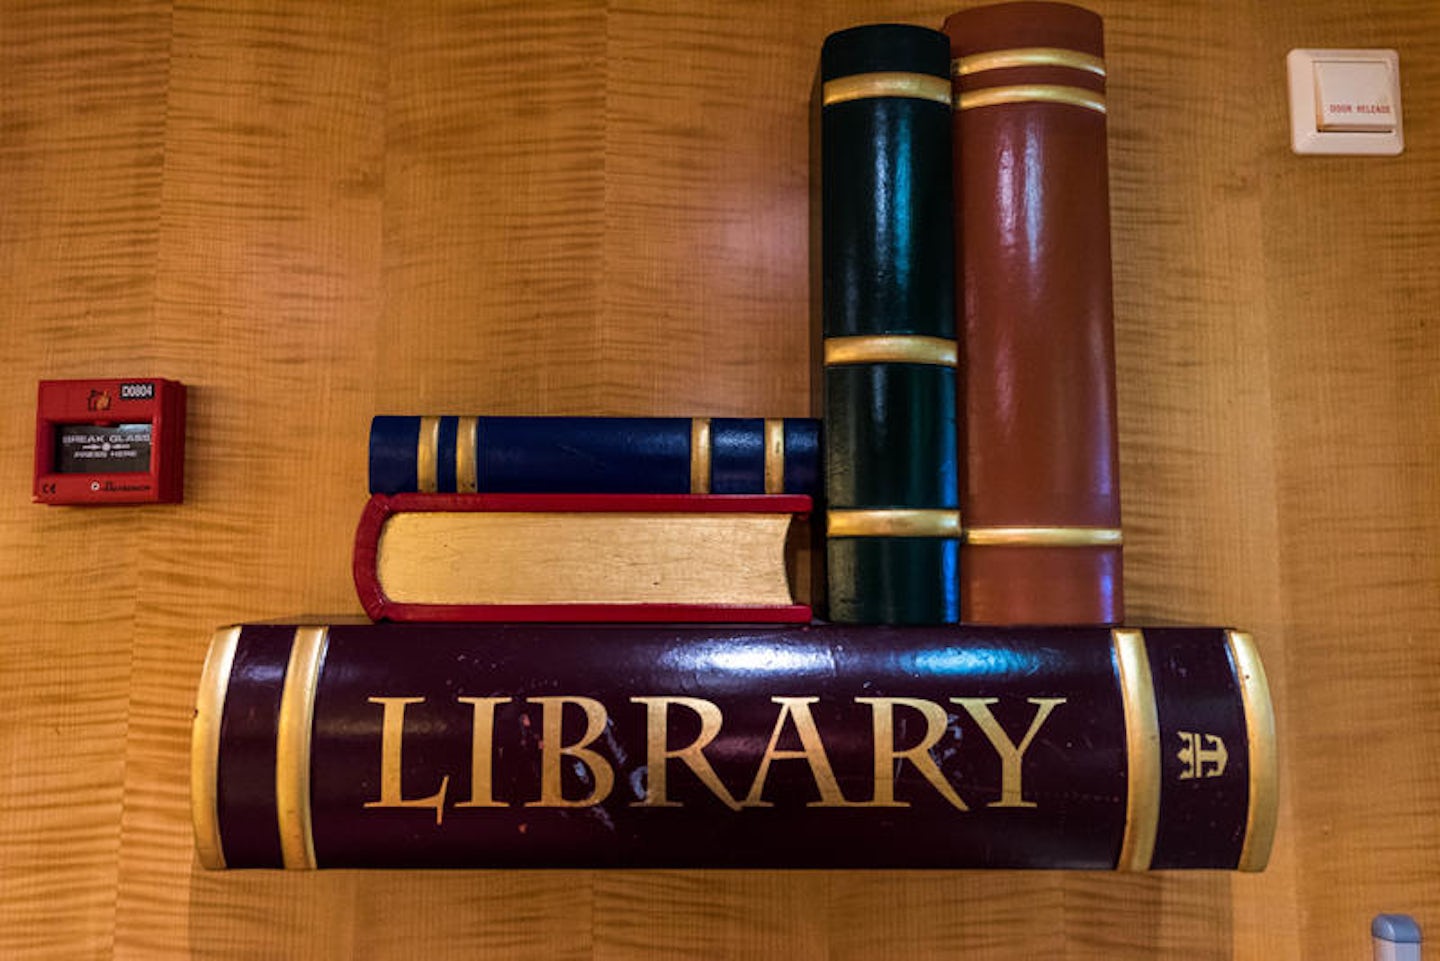 Library on Adventure of the Seas